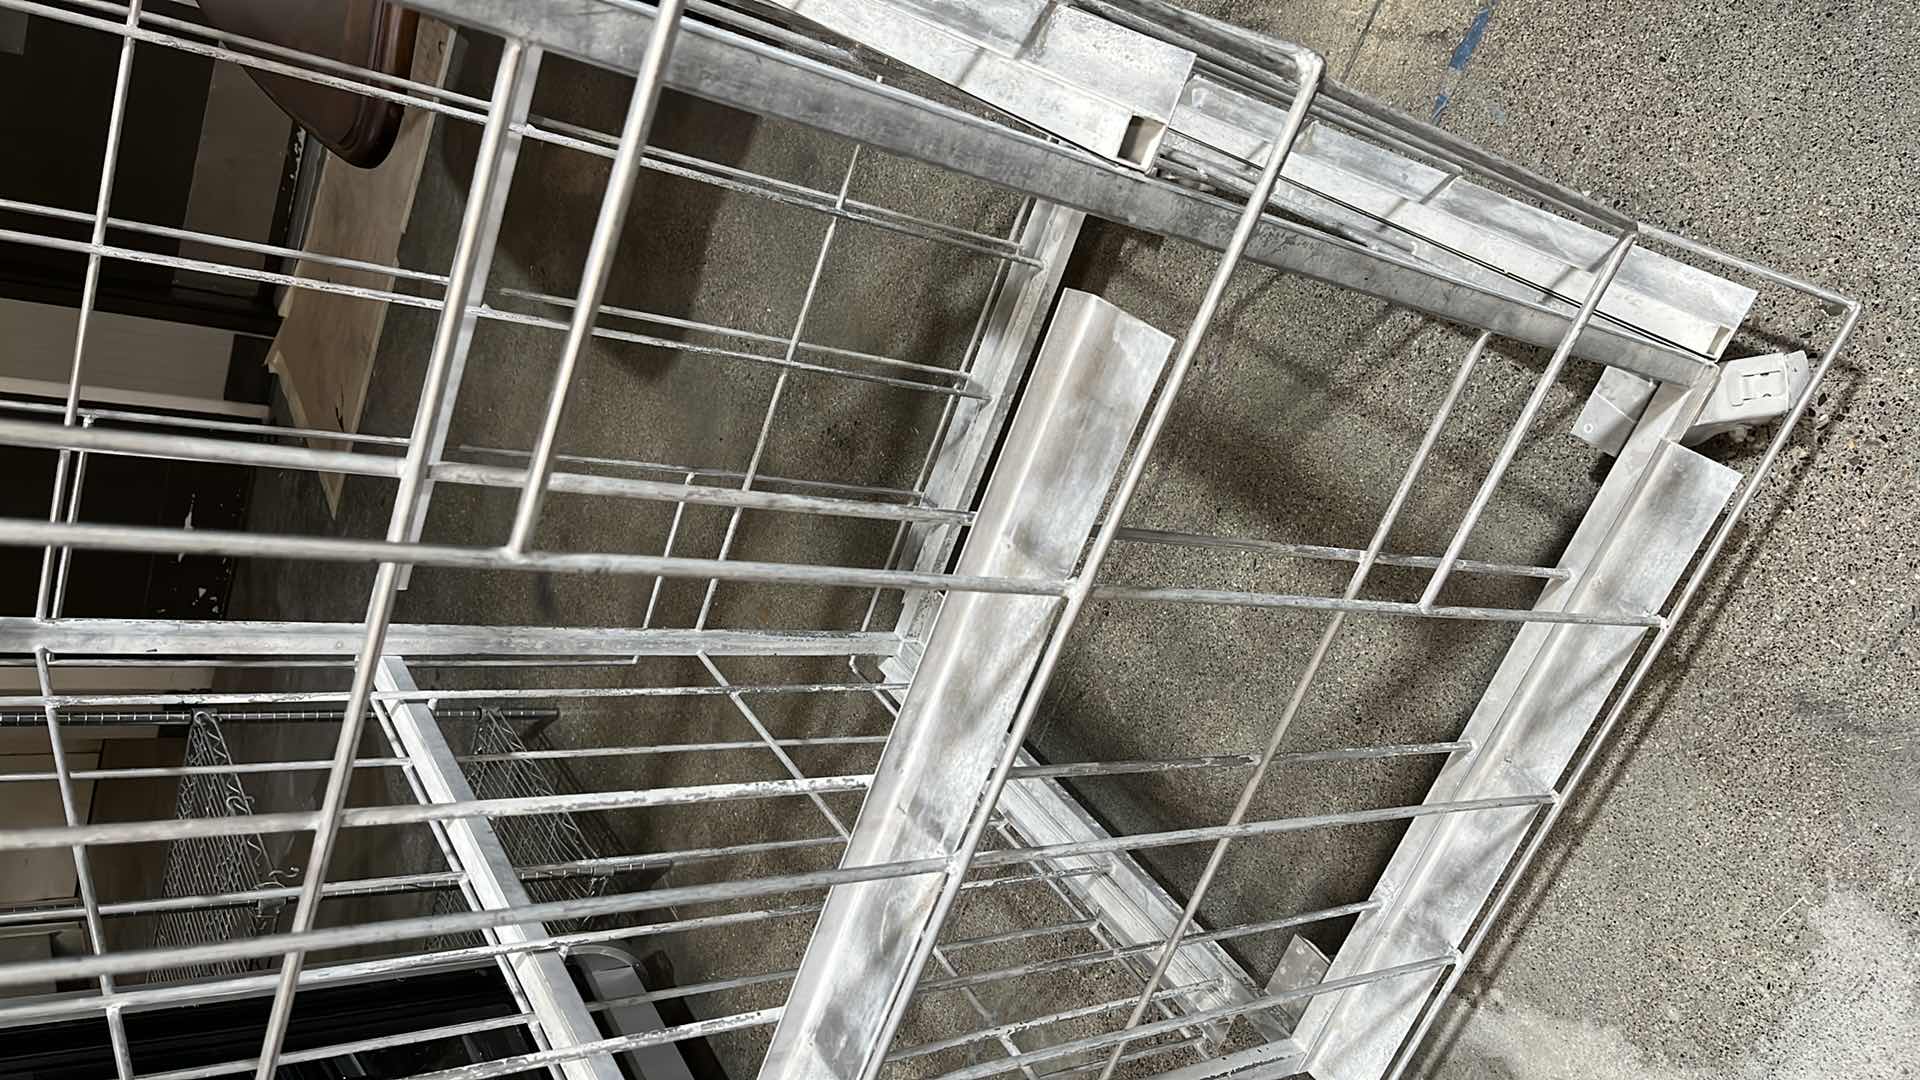 Photo 3 of COMMERCIAL DISHWASHING CAGE 35.75” X 37.75” H 77”